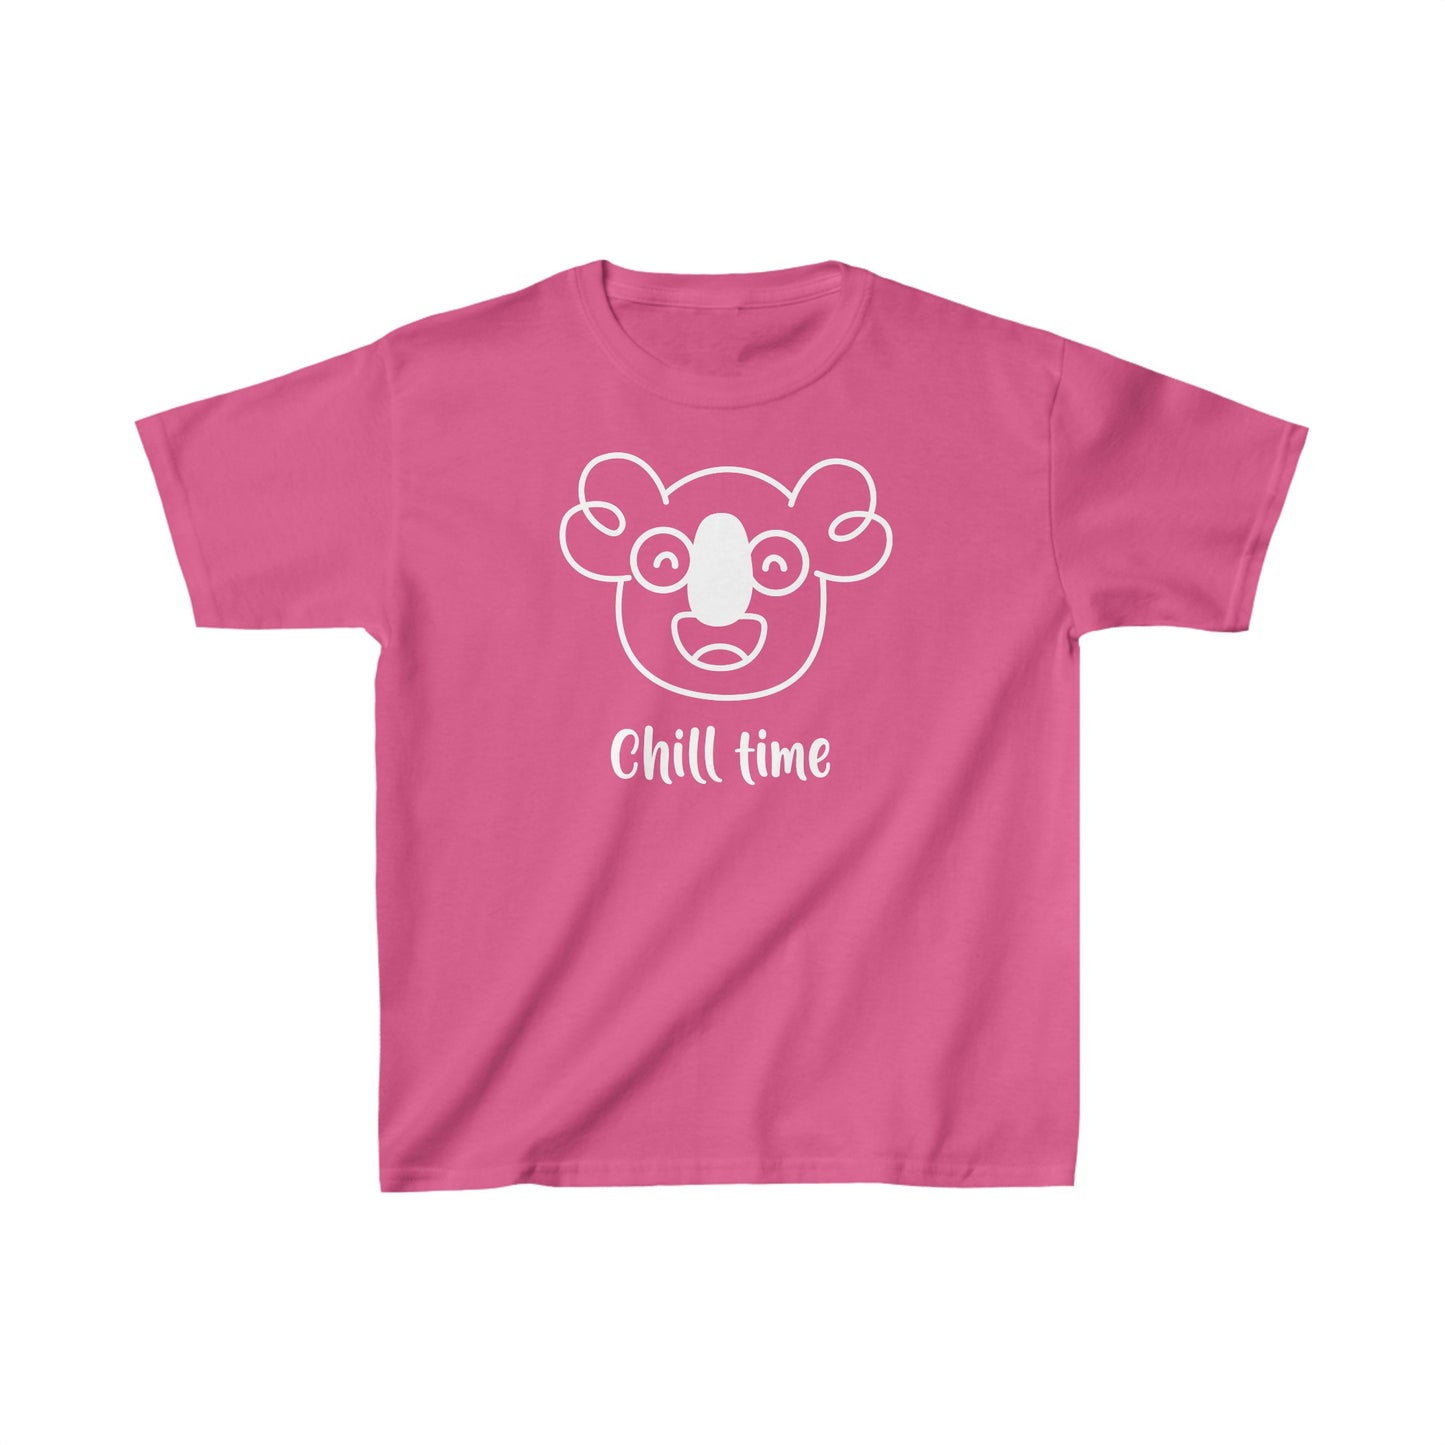 Boo's Chill Time Kid's T-shirt - Vibrant Colors